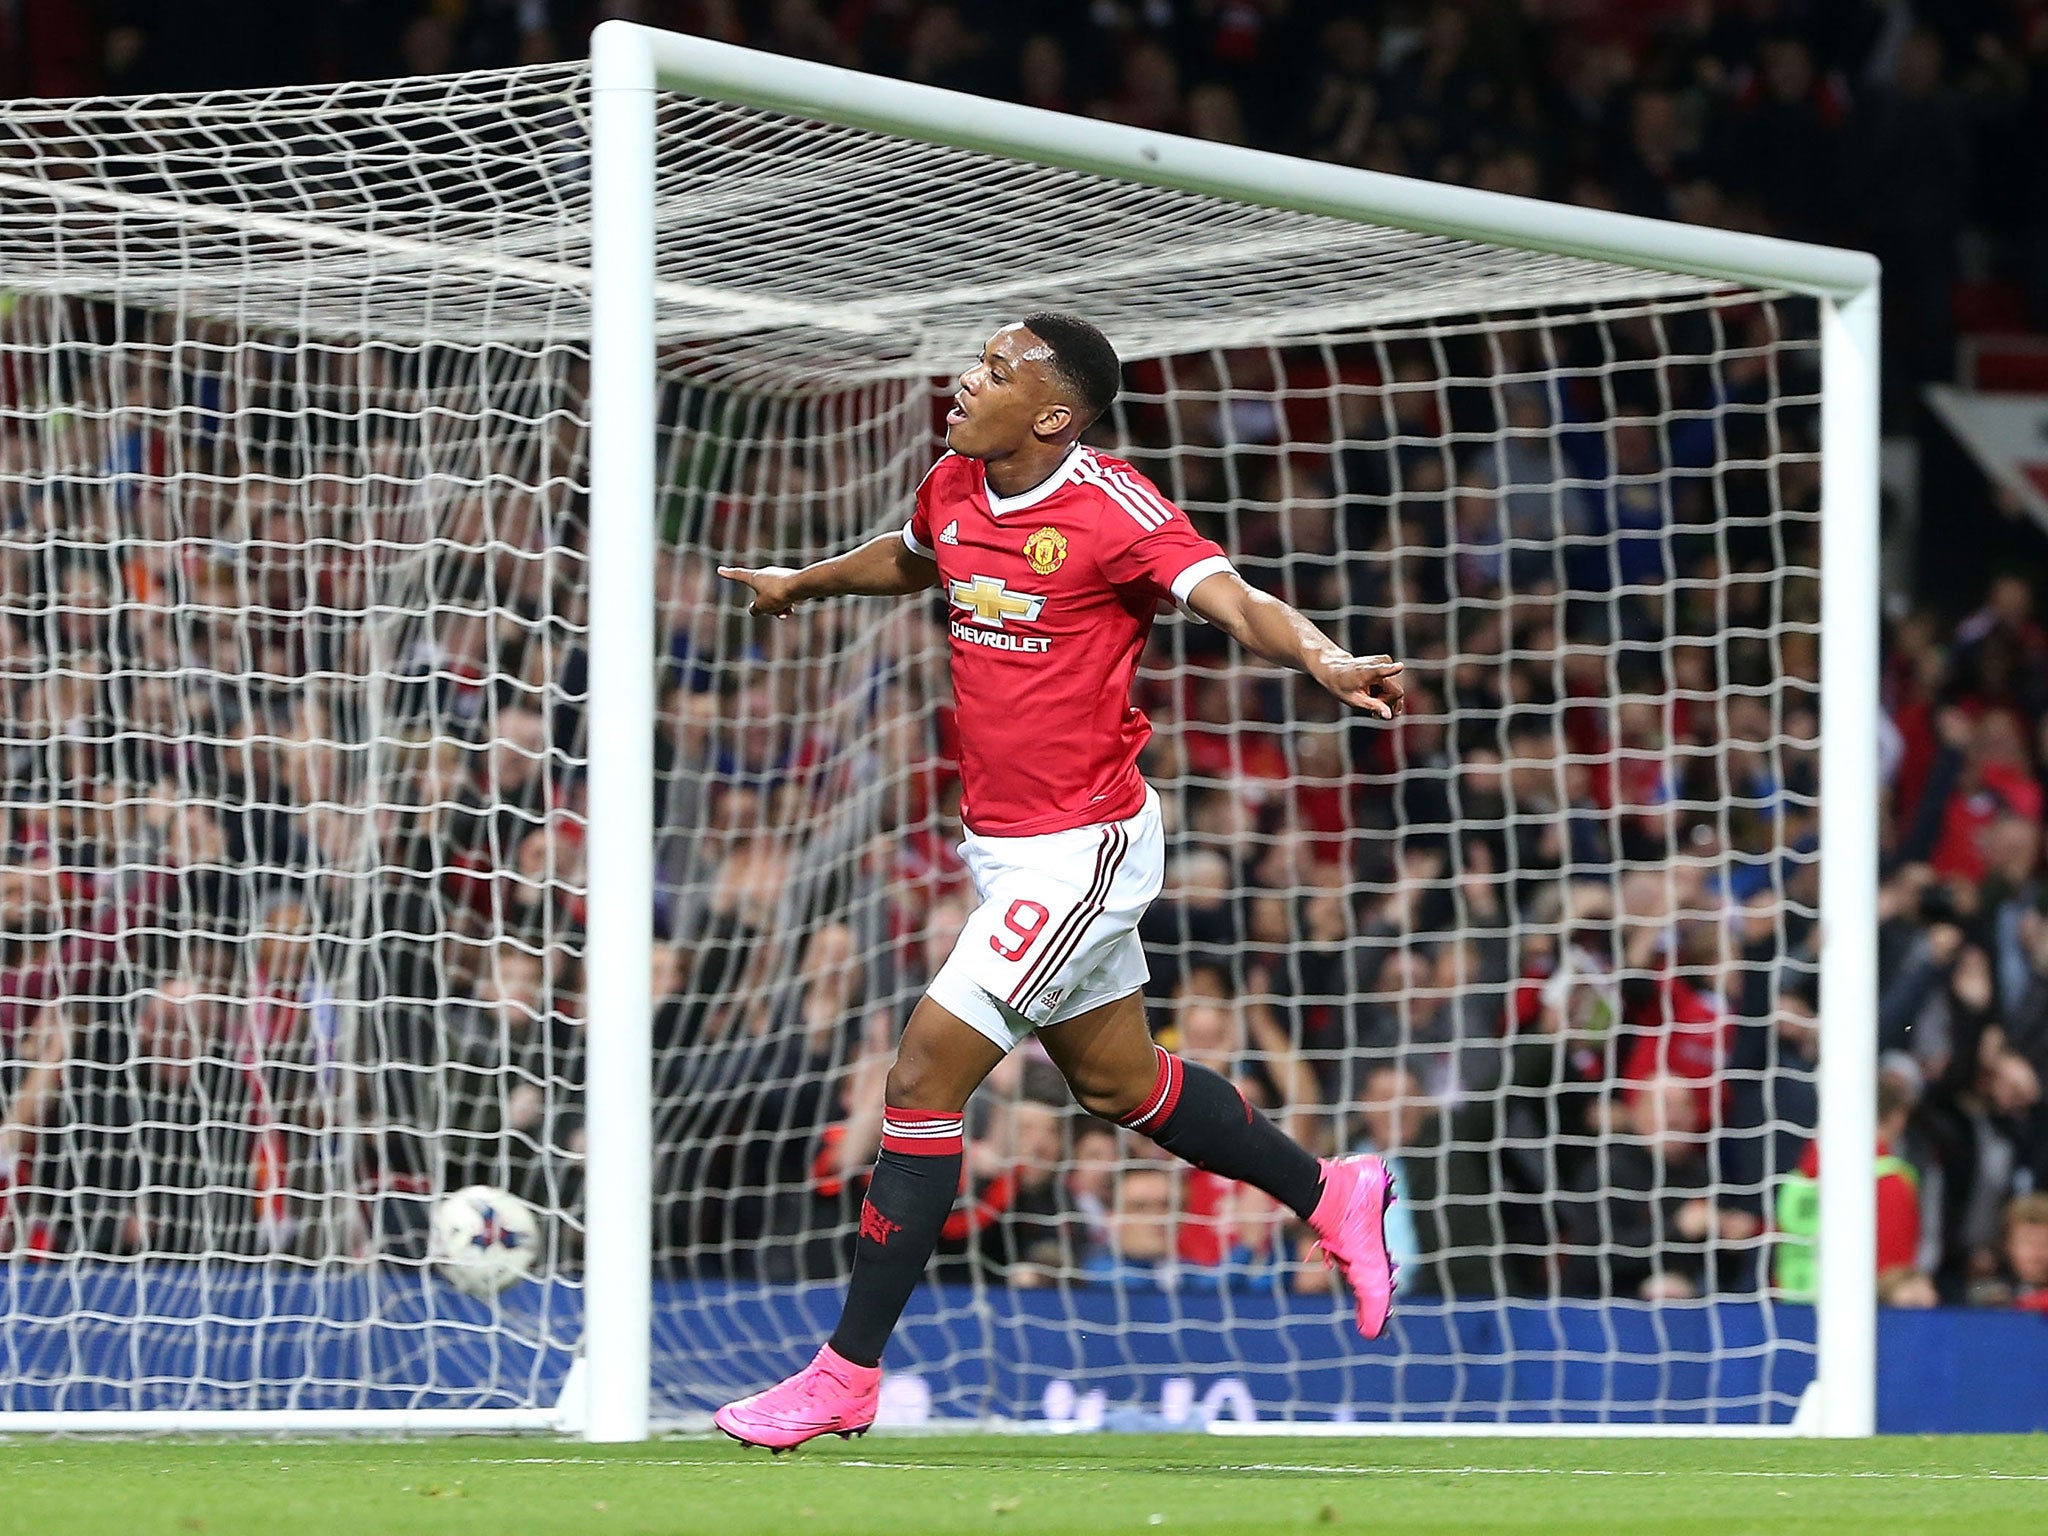 Manchester United striker Anthony Martial was wanted on loan by Everton